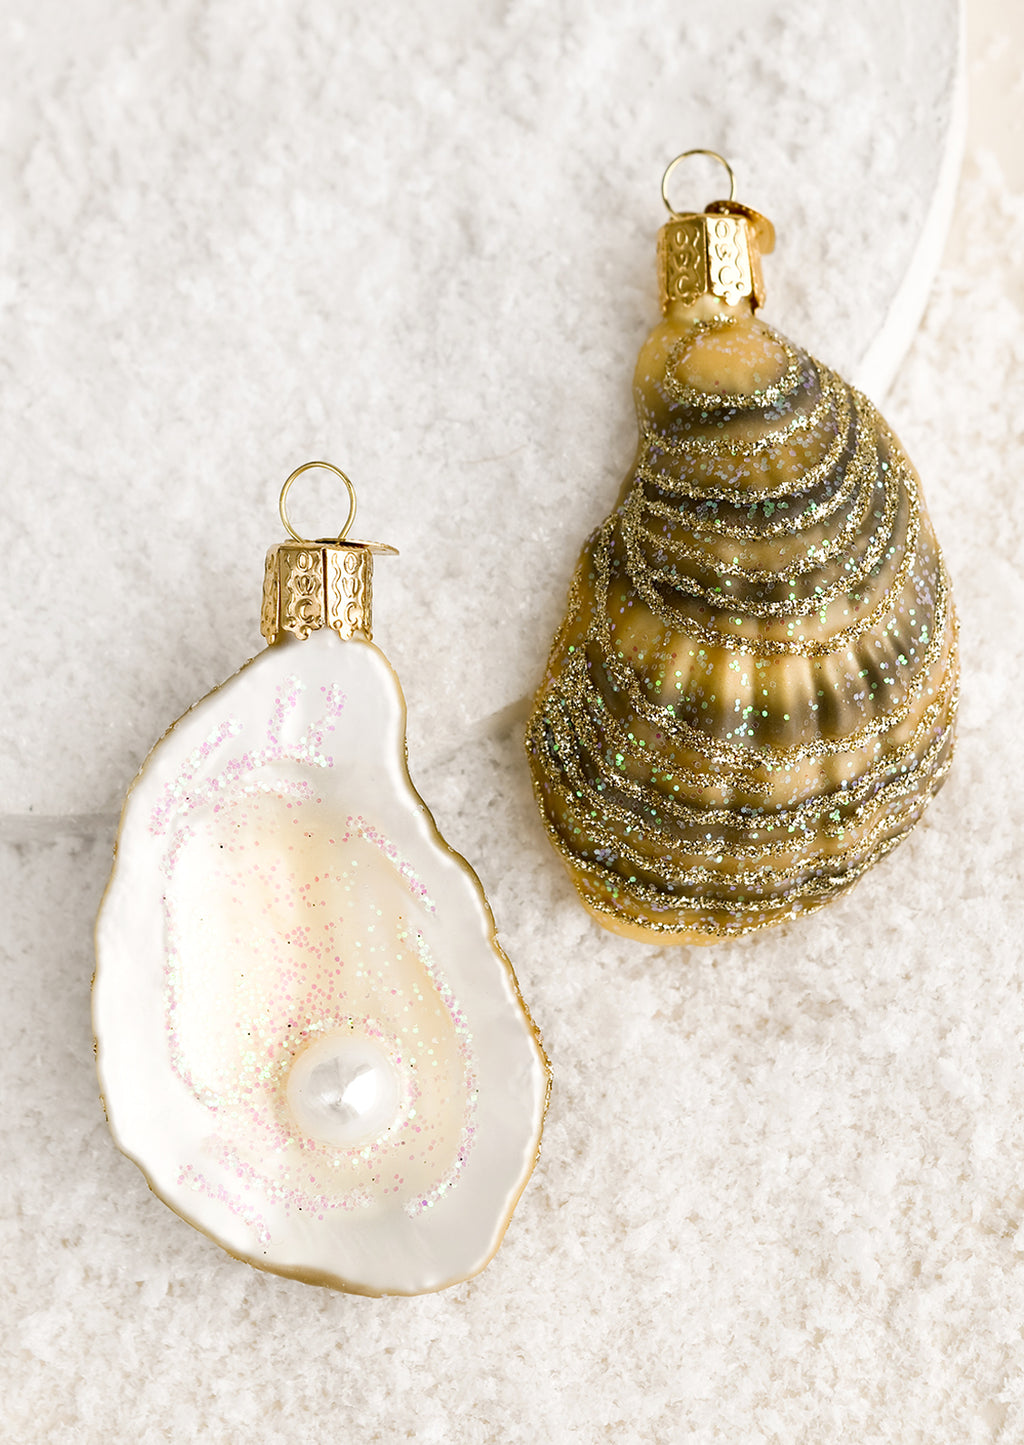 1: Holiday ornaments in the shape of front and back of a half oyster shell.